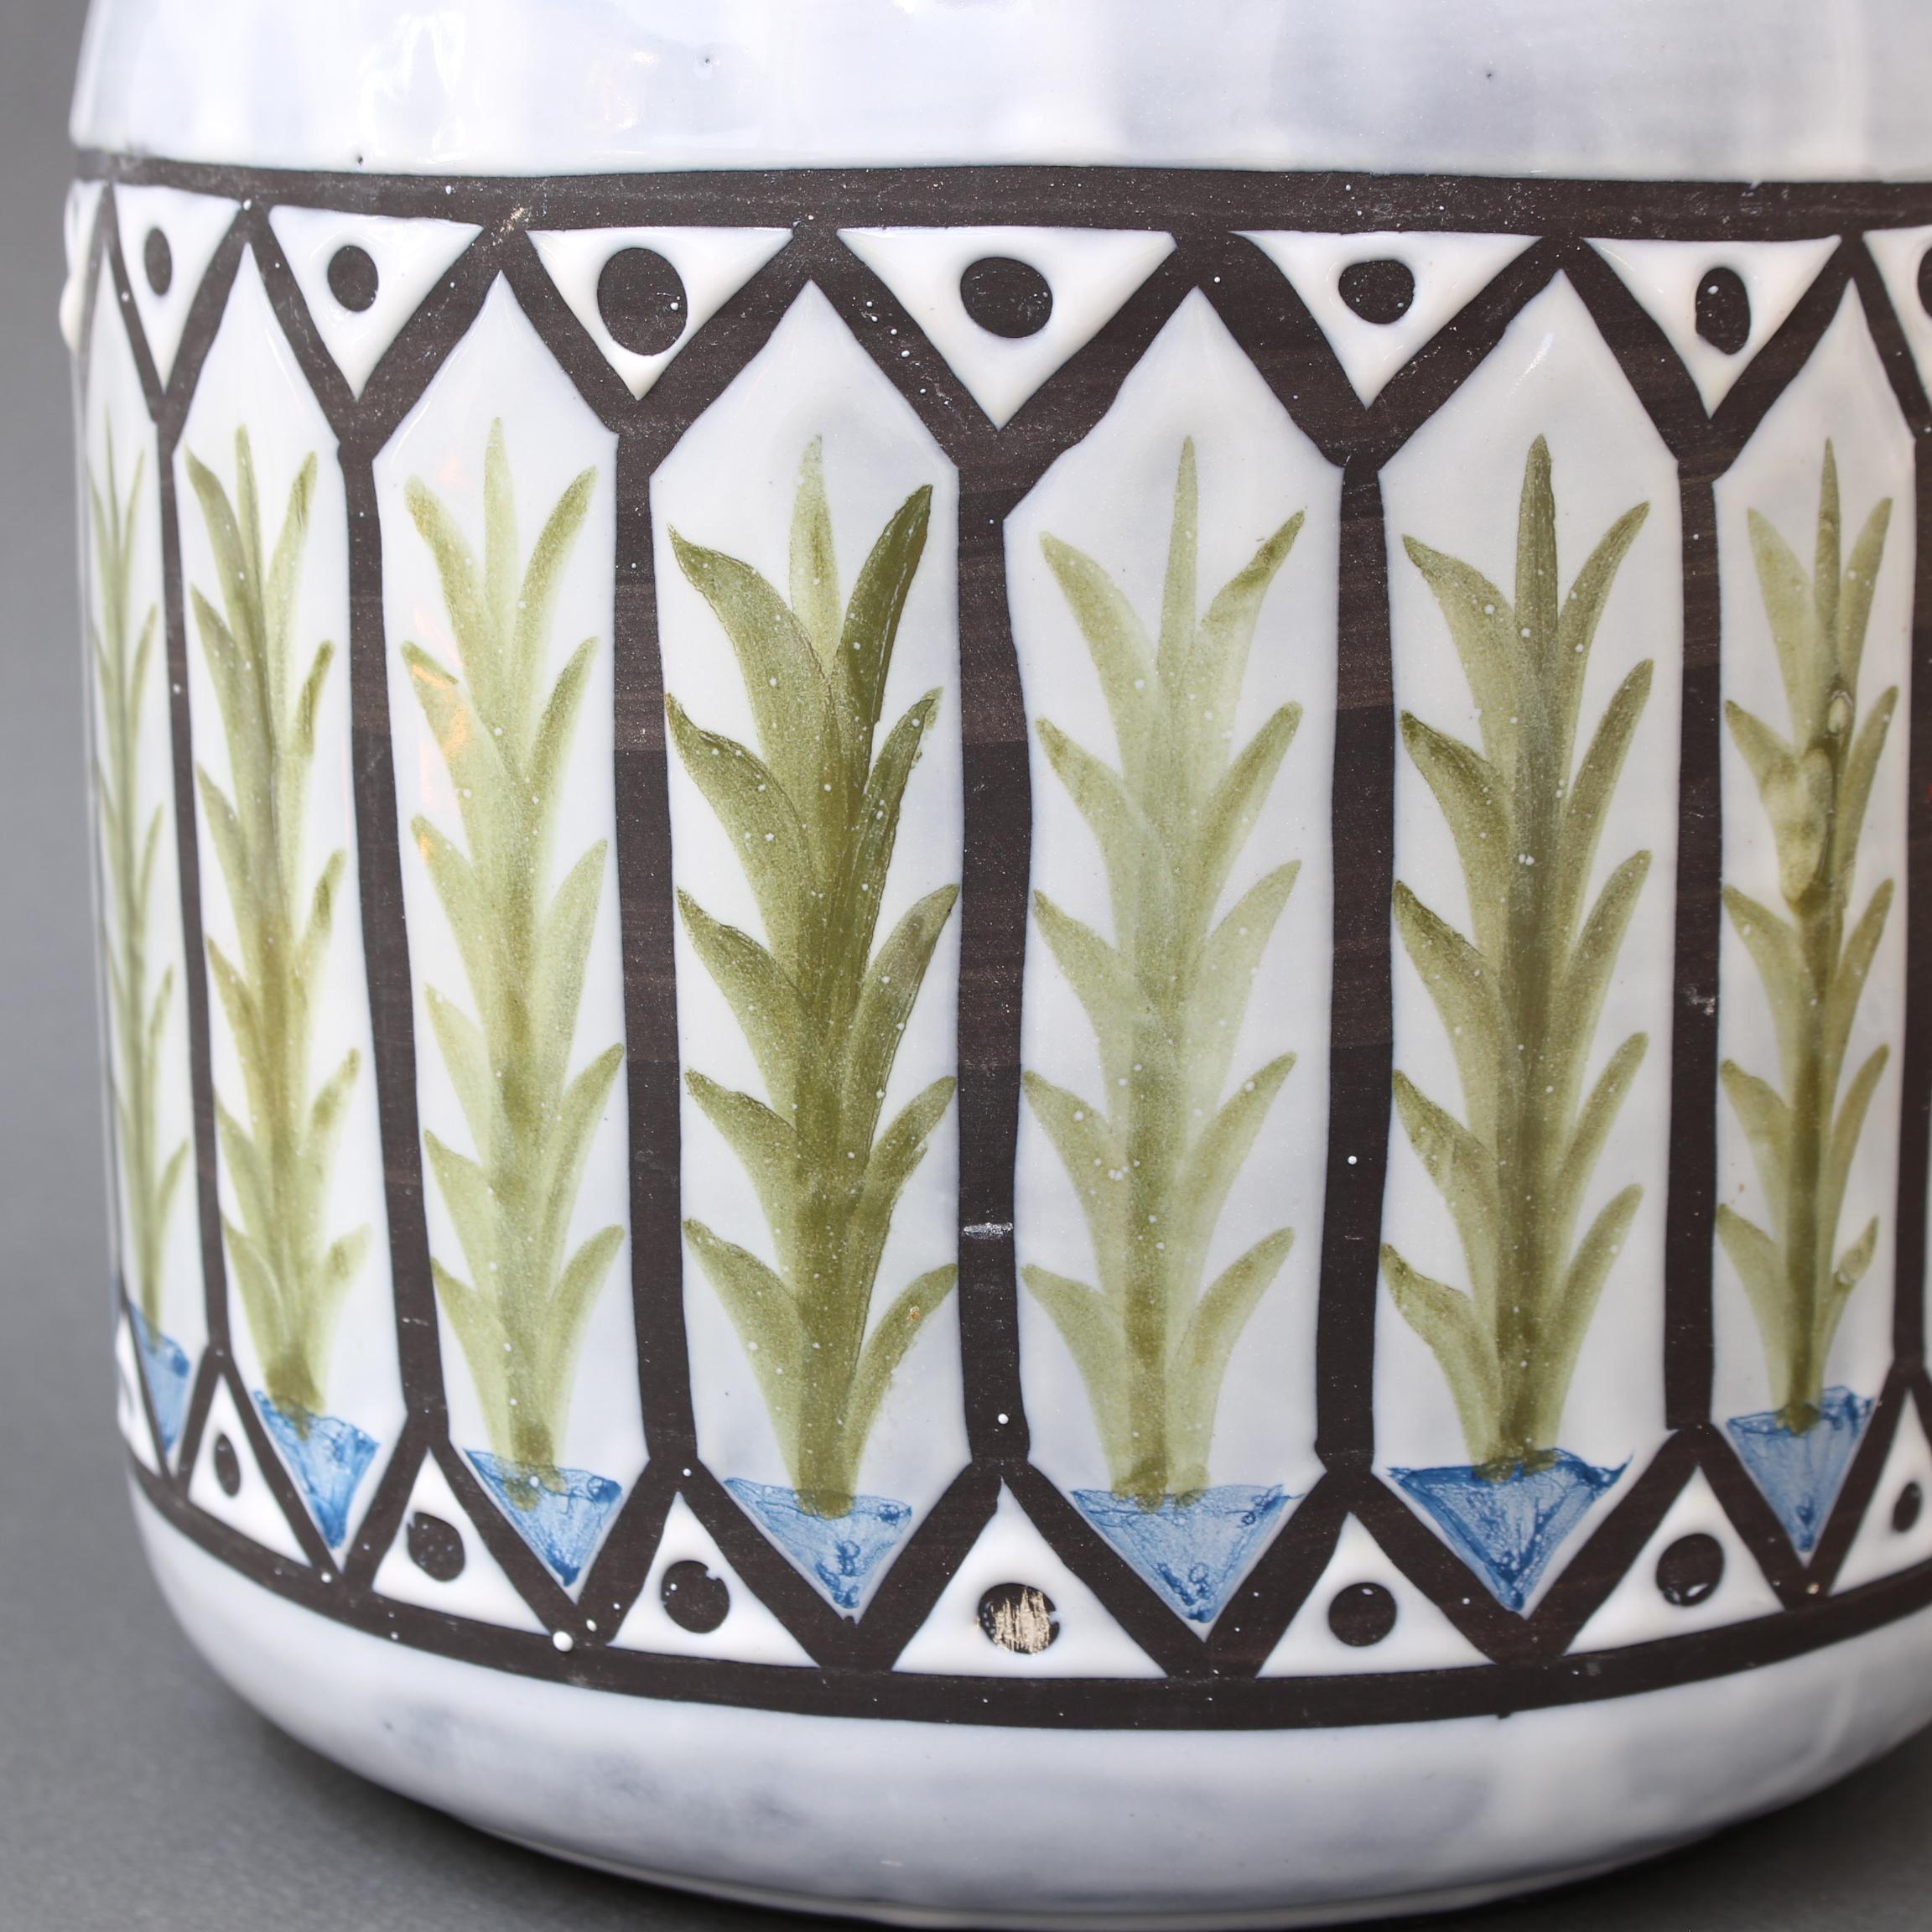 Vintage French Ceramic Cachepot by Roger Capron, 'circa 1970s' For Sale 2